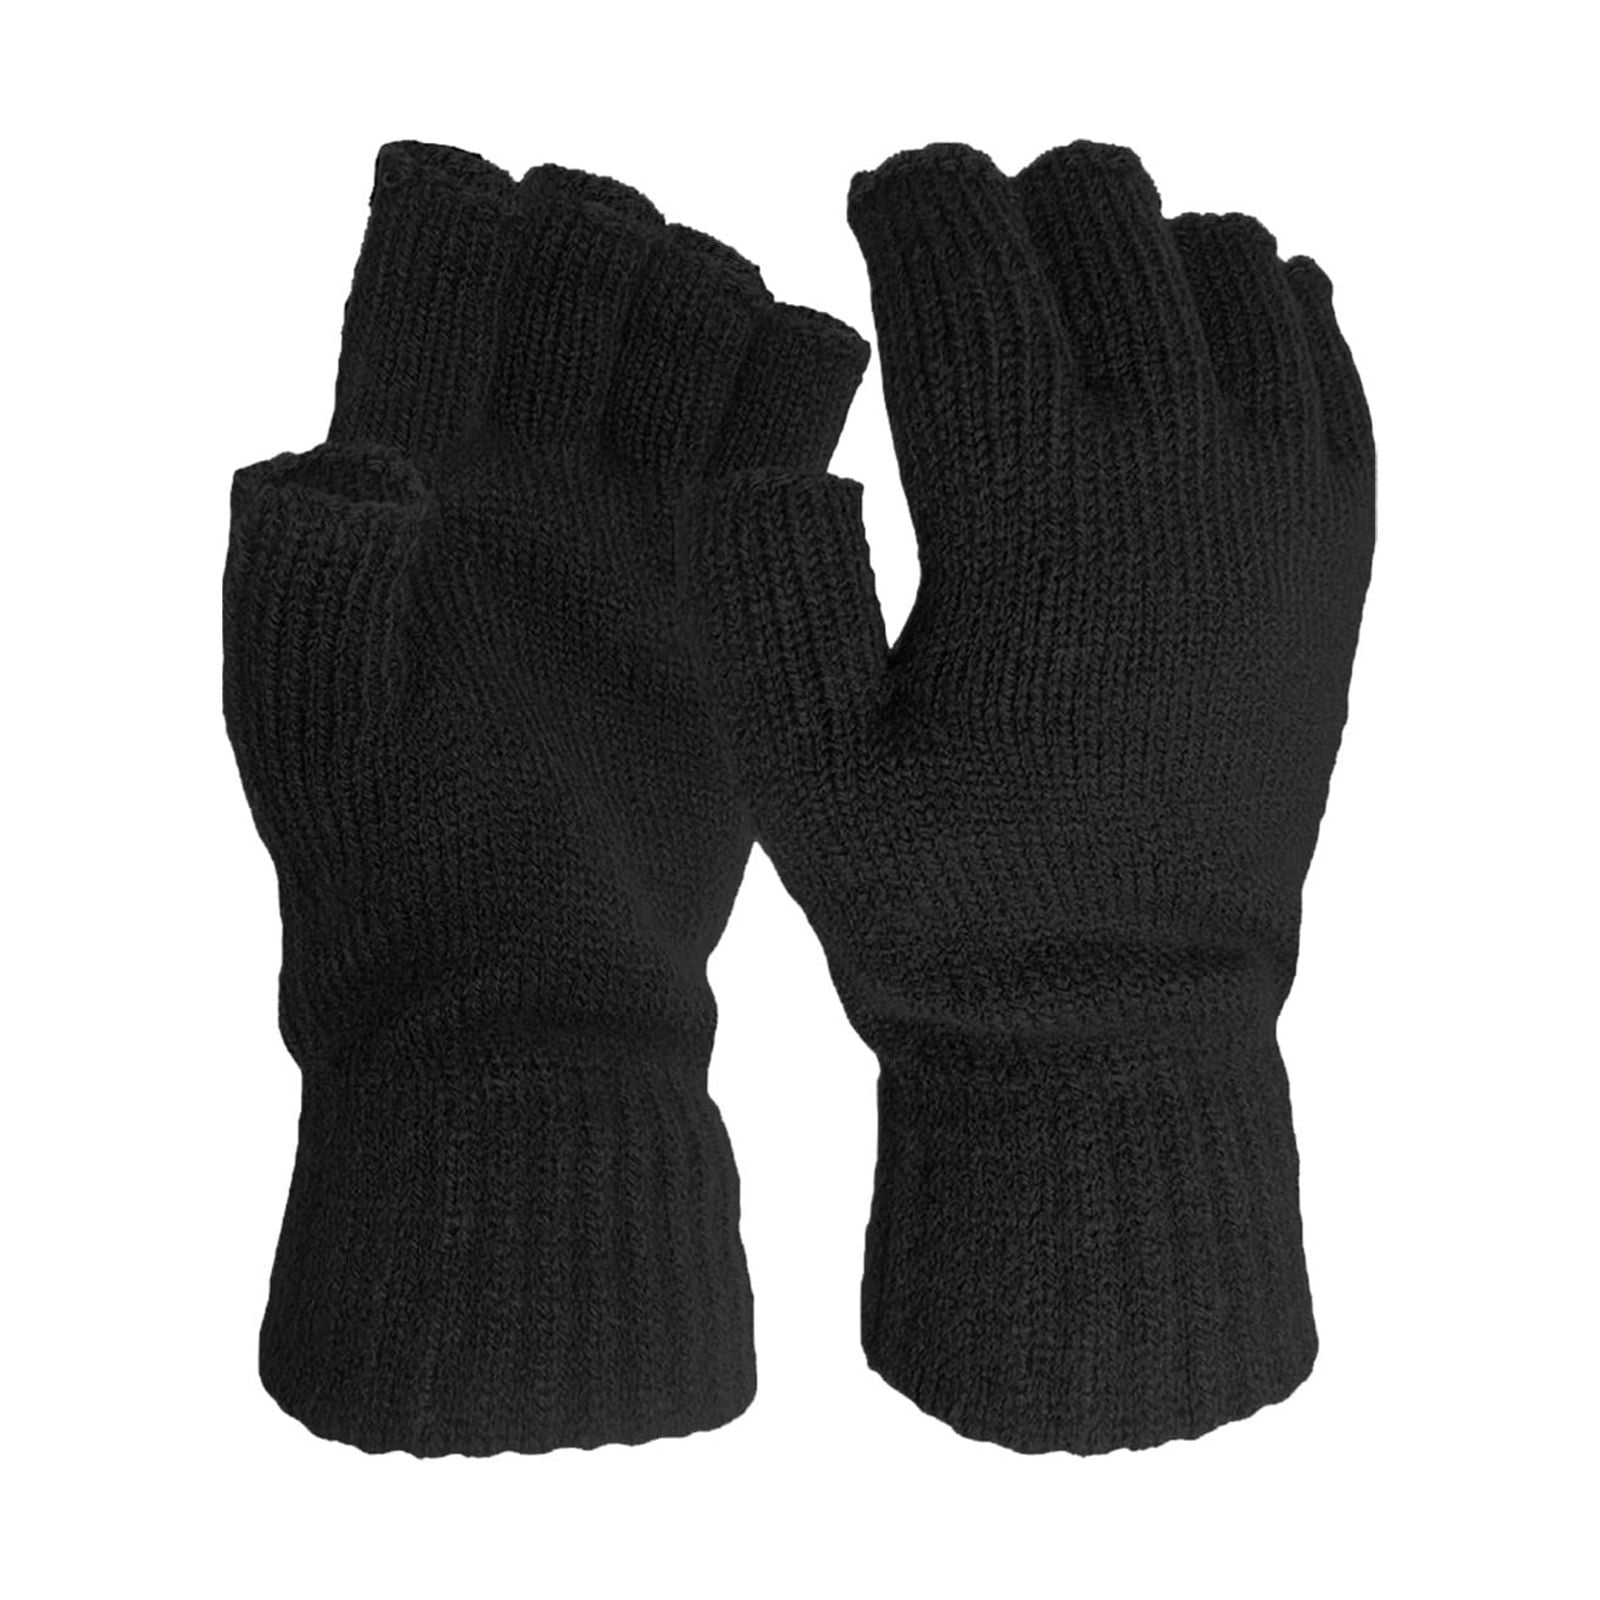 Frehsky warm gloves Men's And Women's Winter Warm Solid Color Knitted  Half-finger Gloves Grey